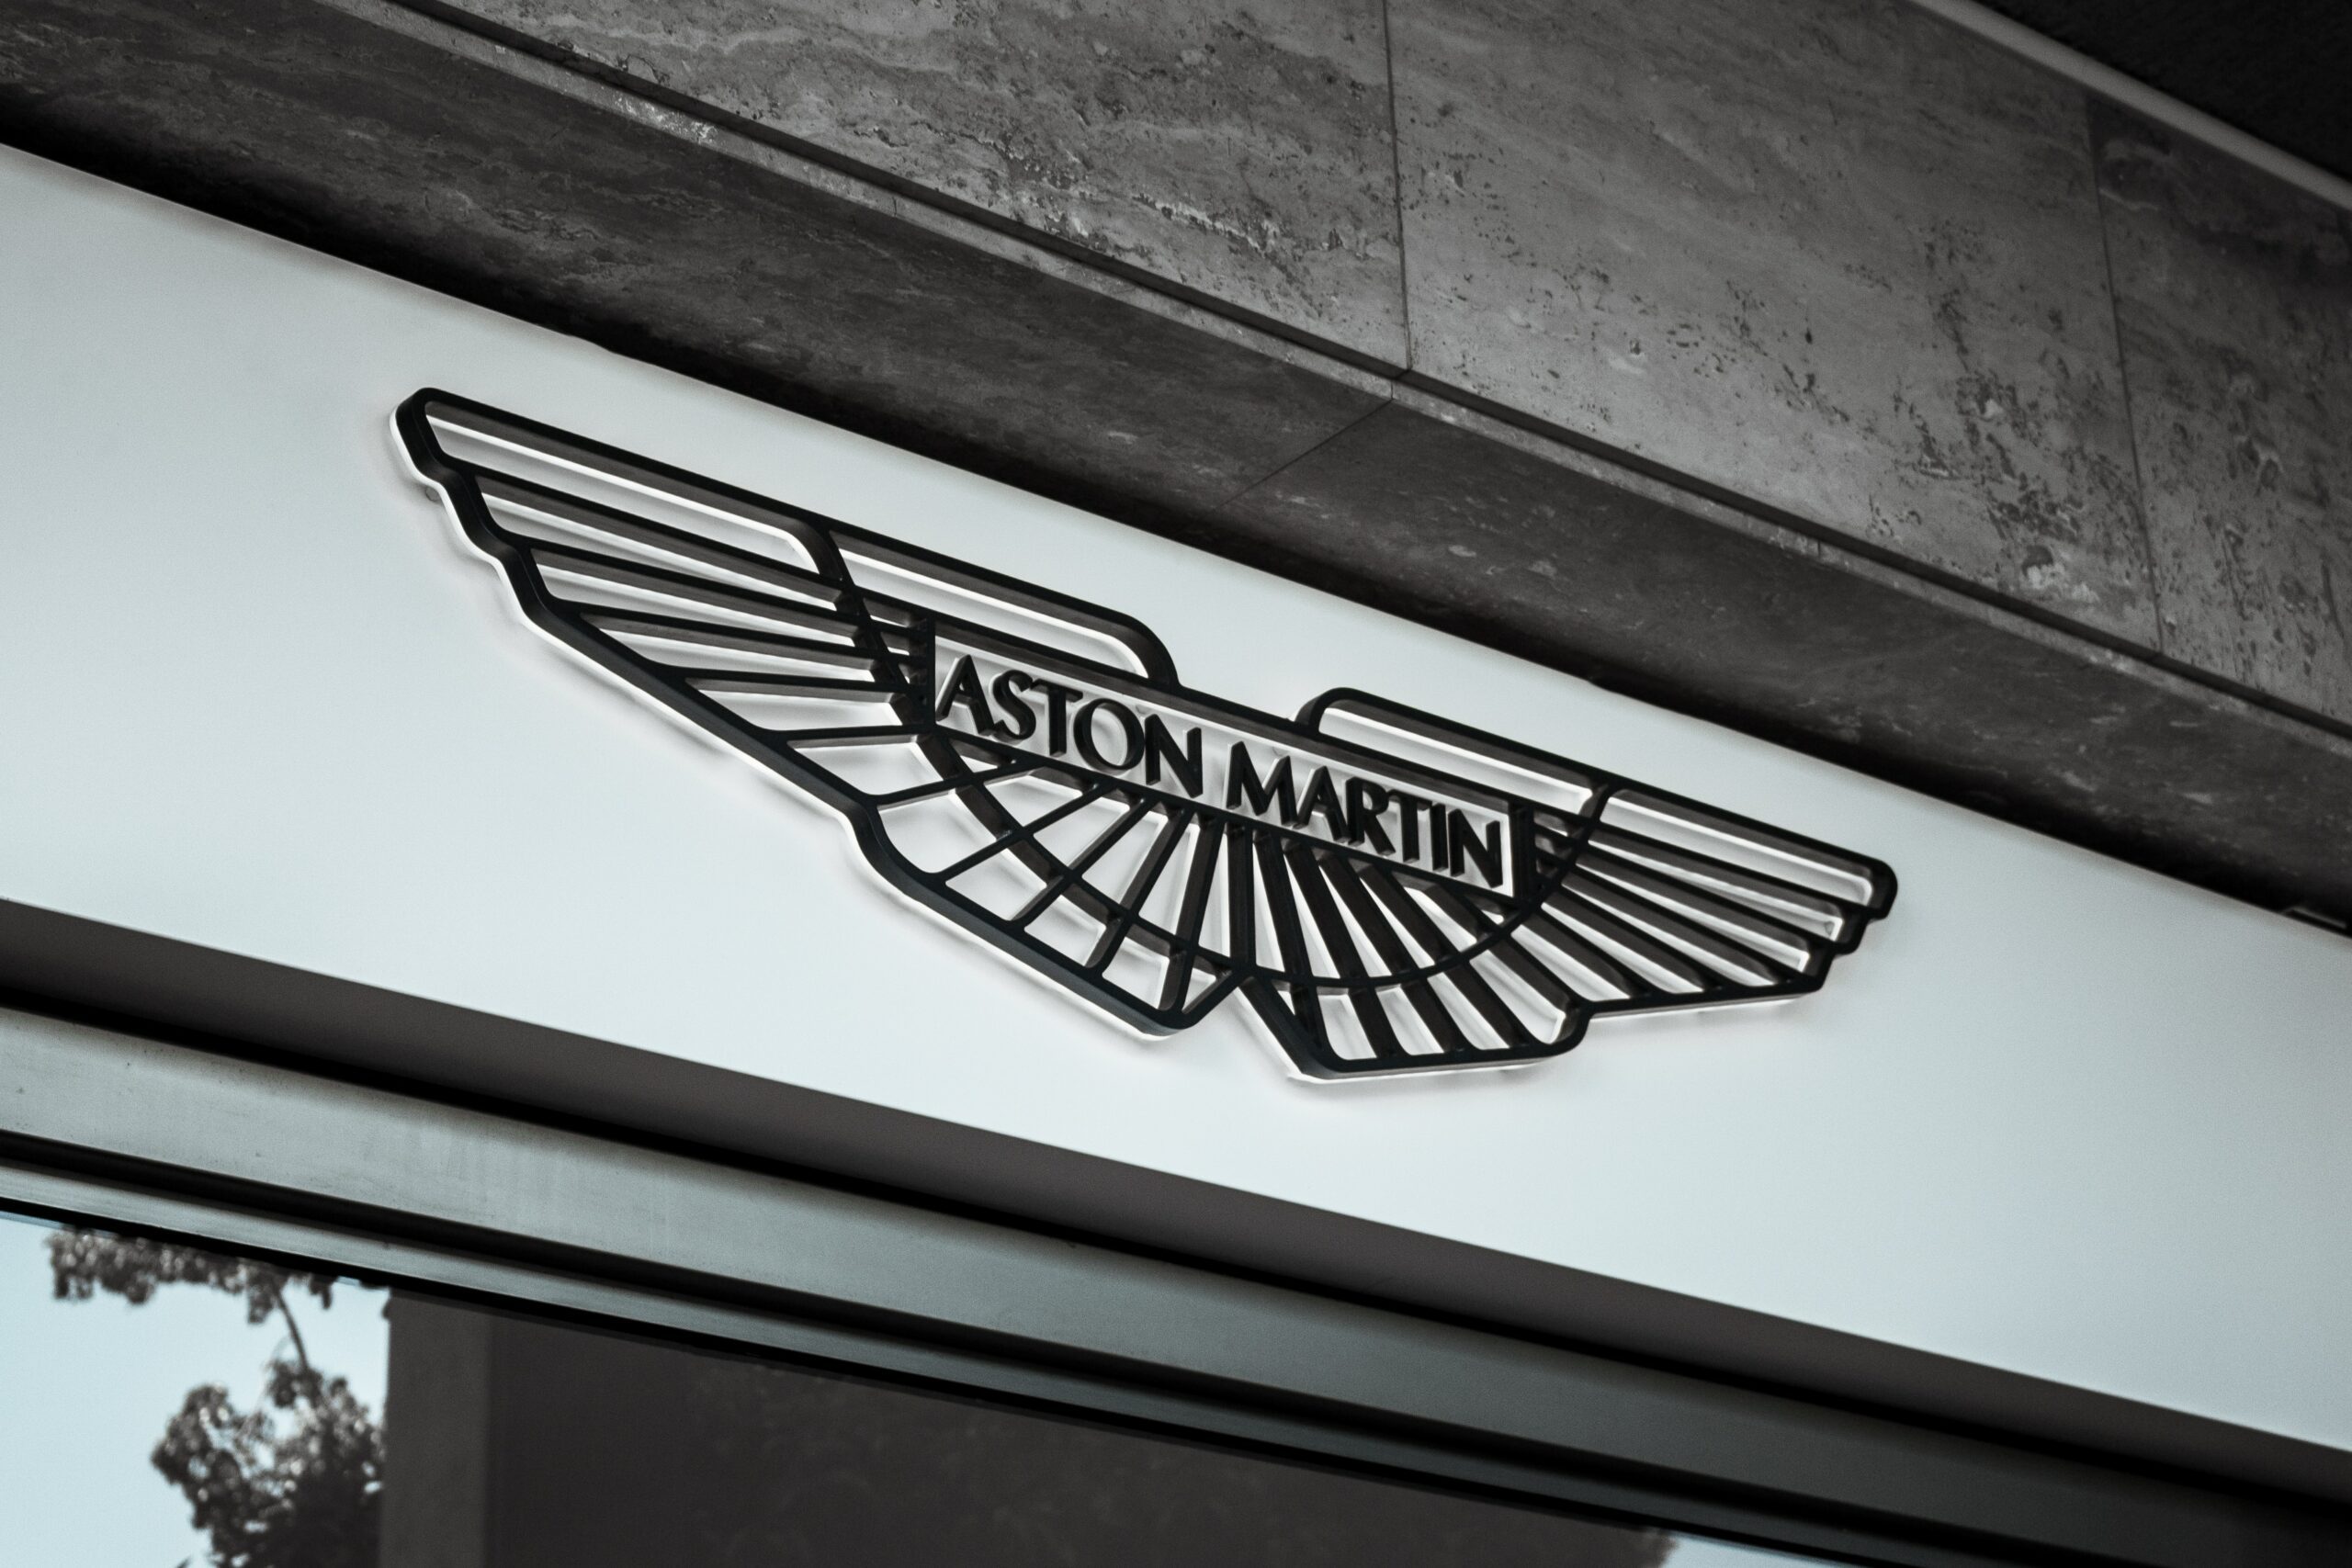 Car Logos With Wings: Car Brands With Wings, Car Emblems With Wings